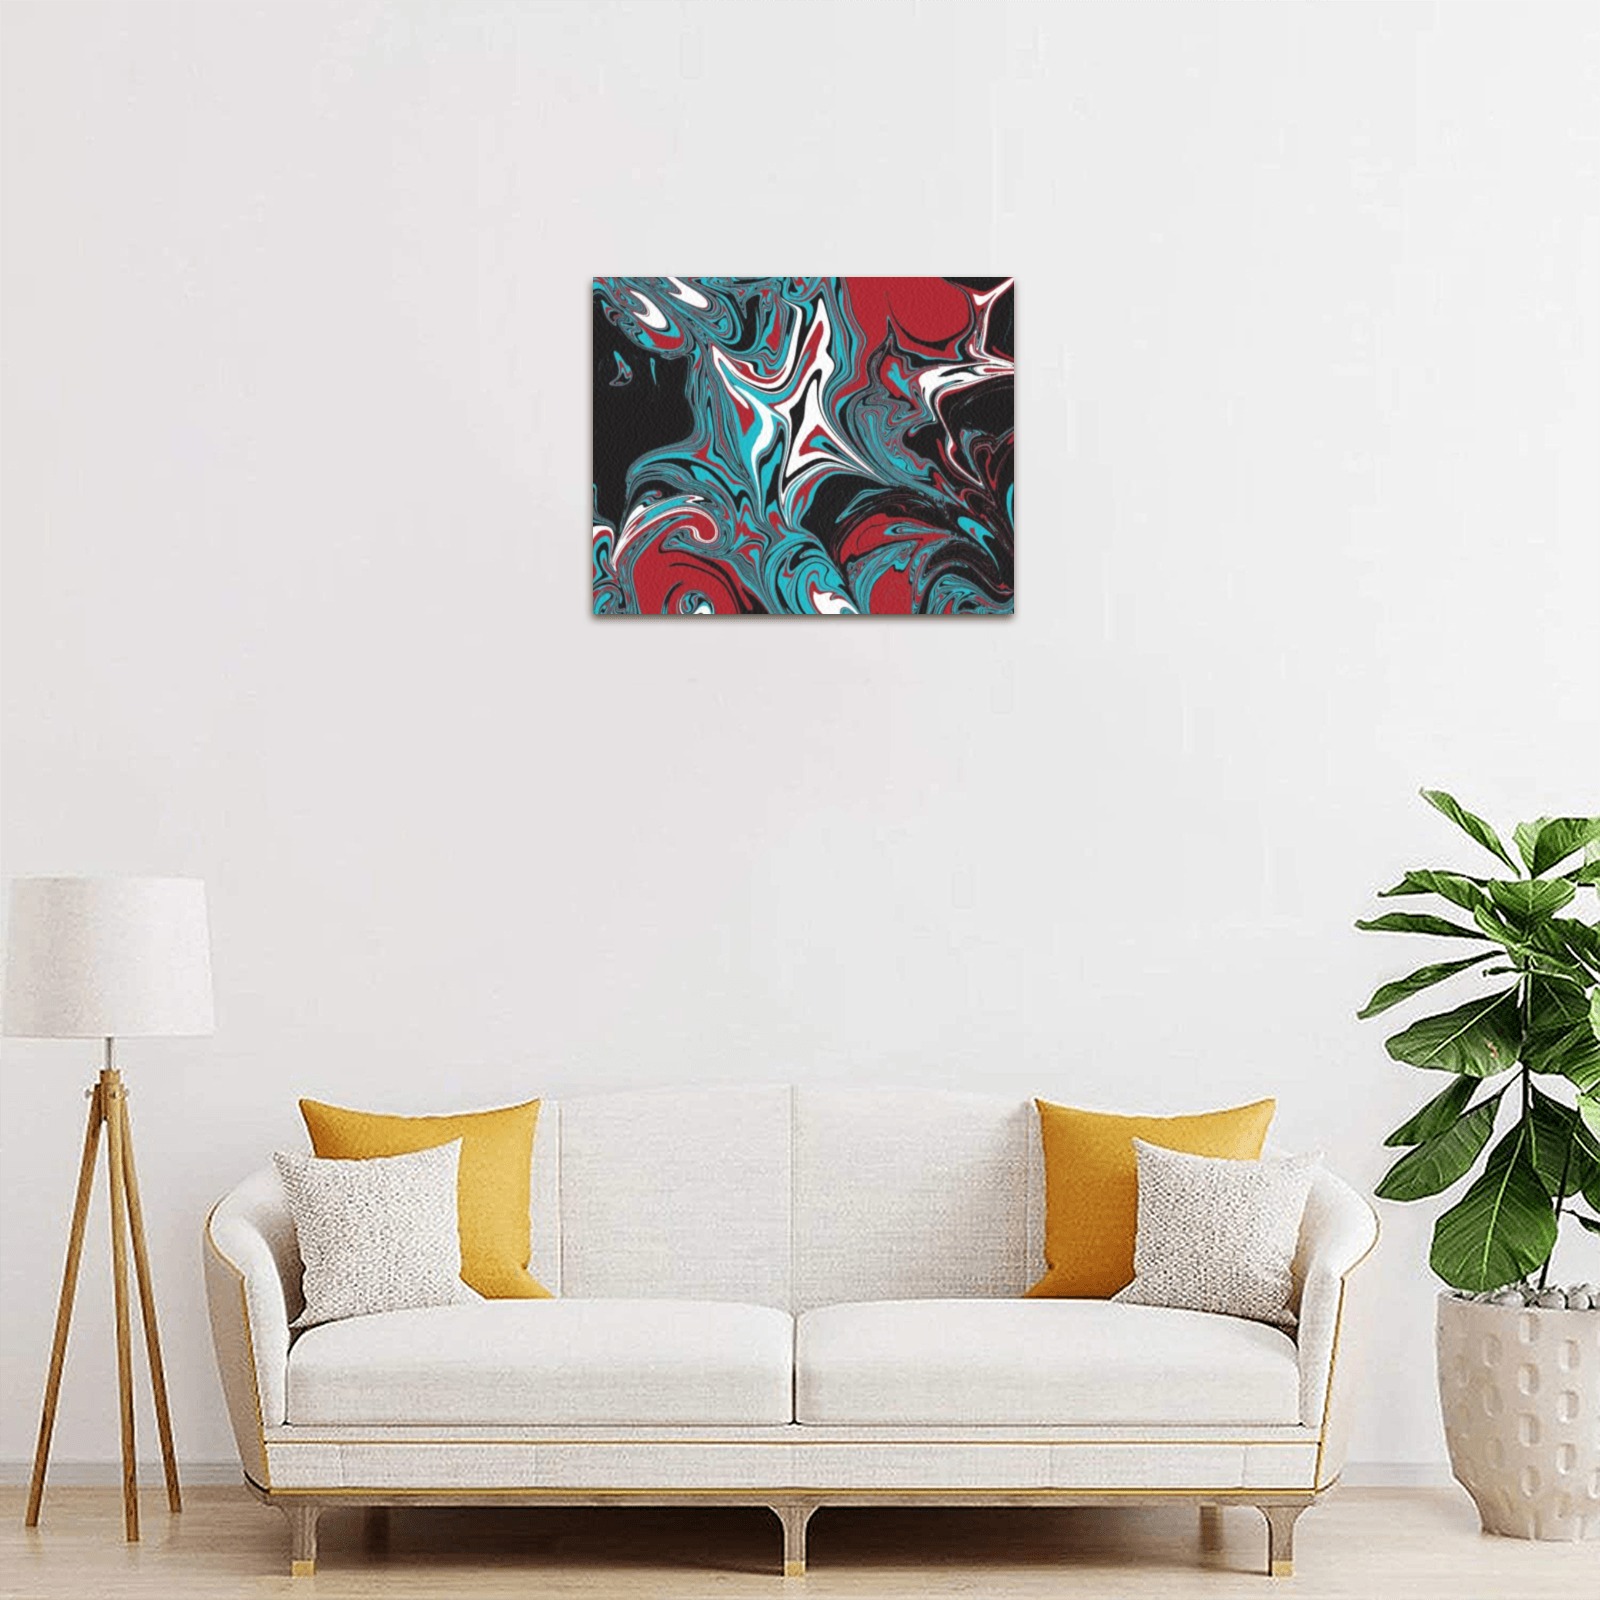 Dark Wave of Colors Upgraded Canvas Print 10"x8"